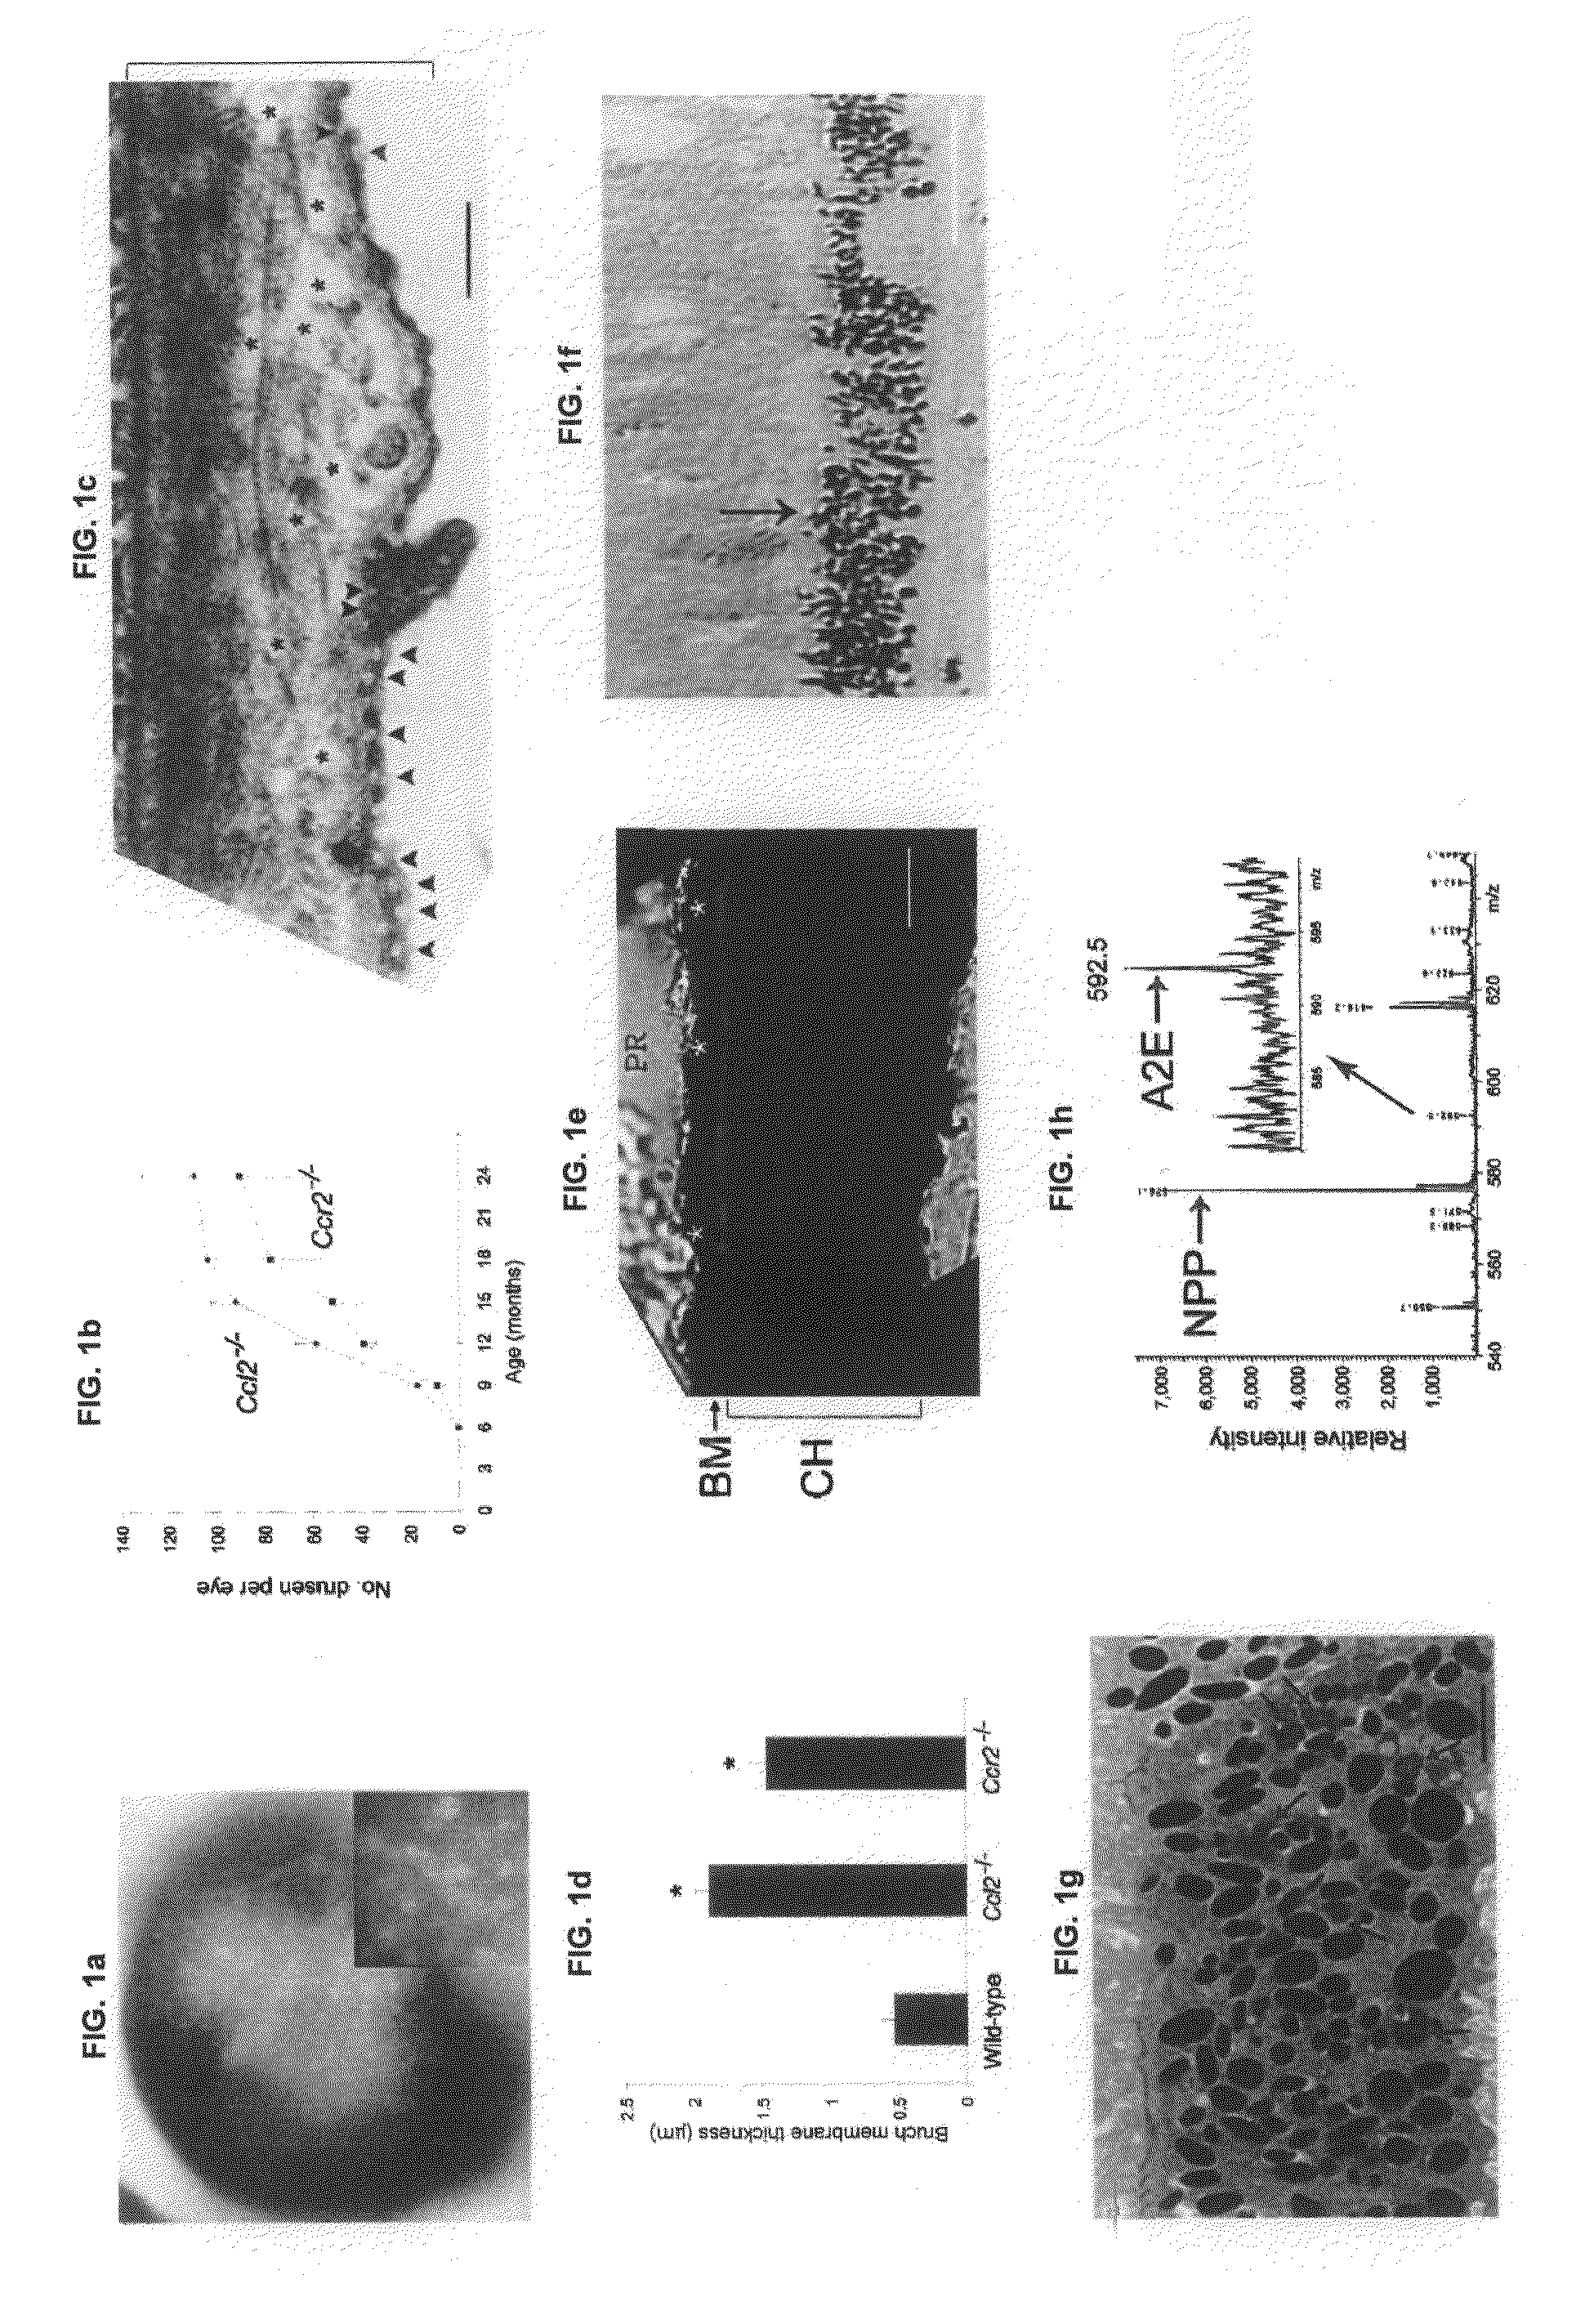 Methods and animal model for analyzing age-related macular degeneration